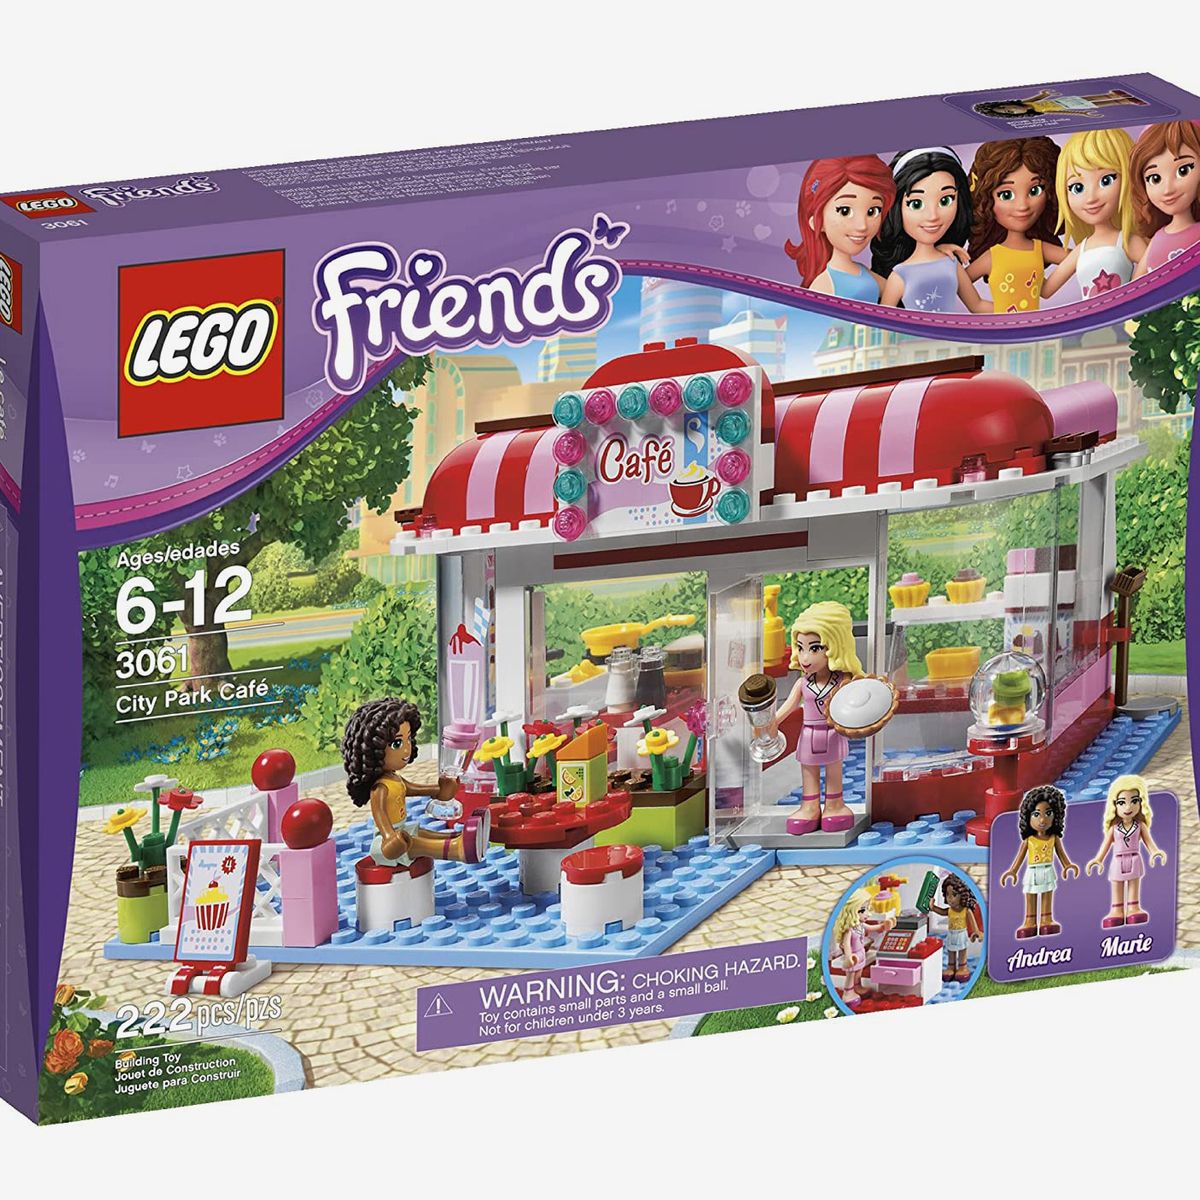 lego for 10 yr old girl